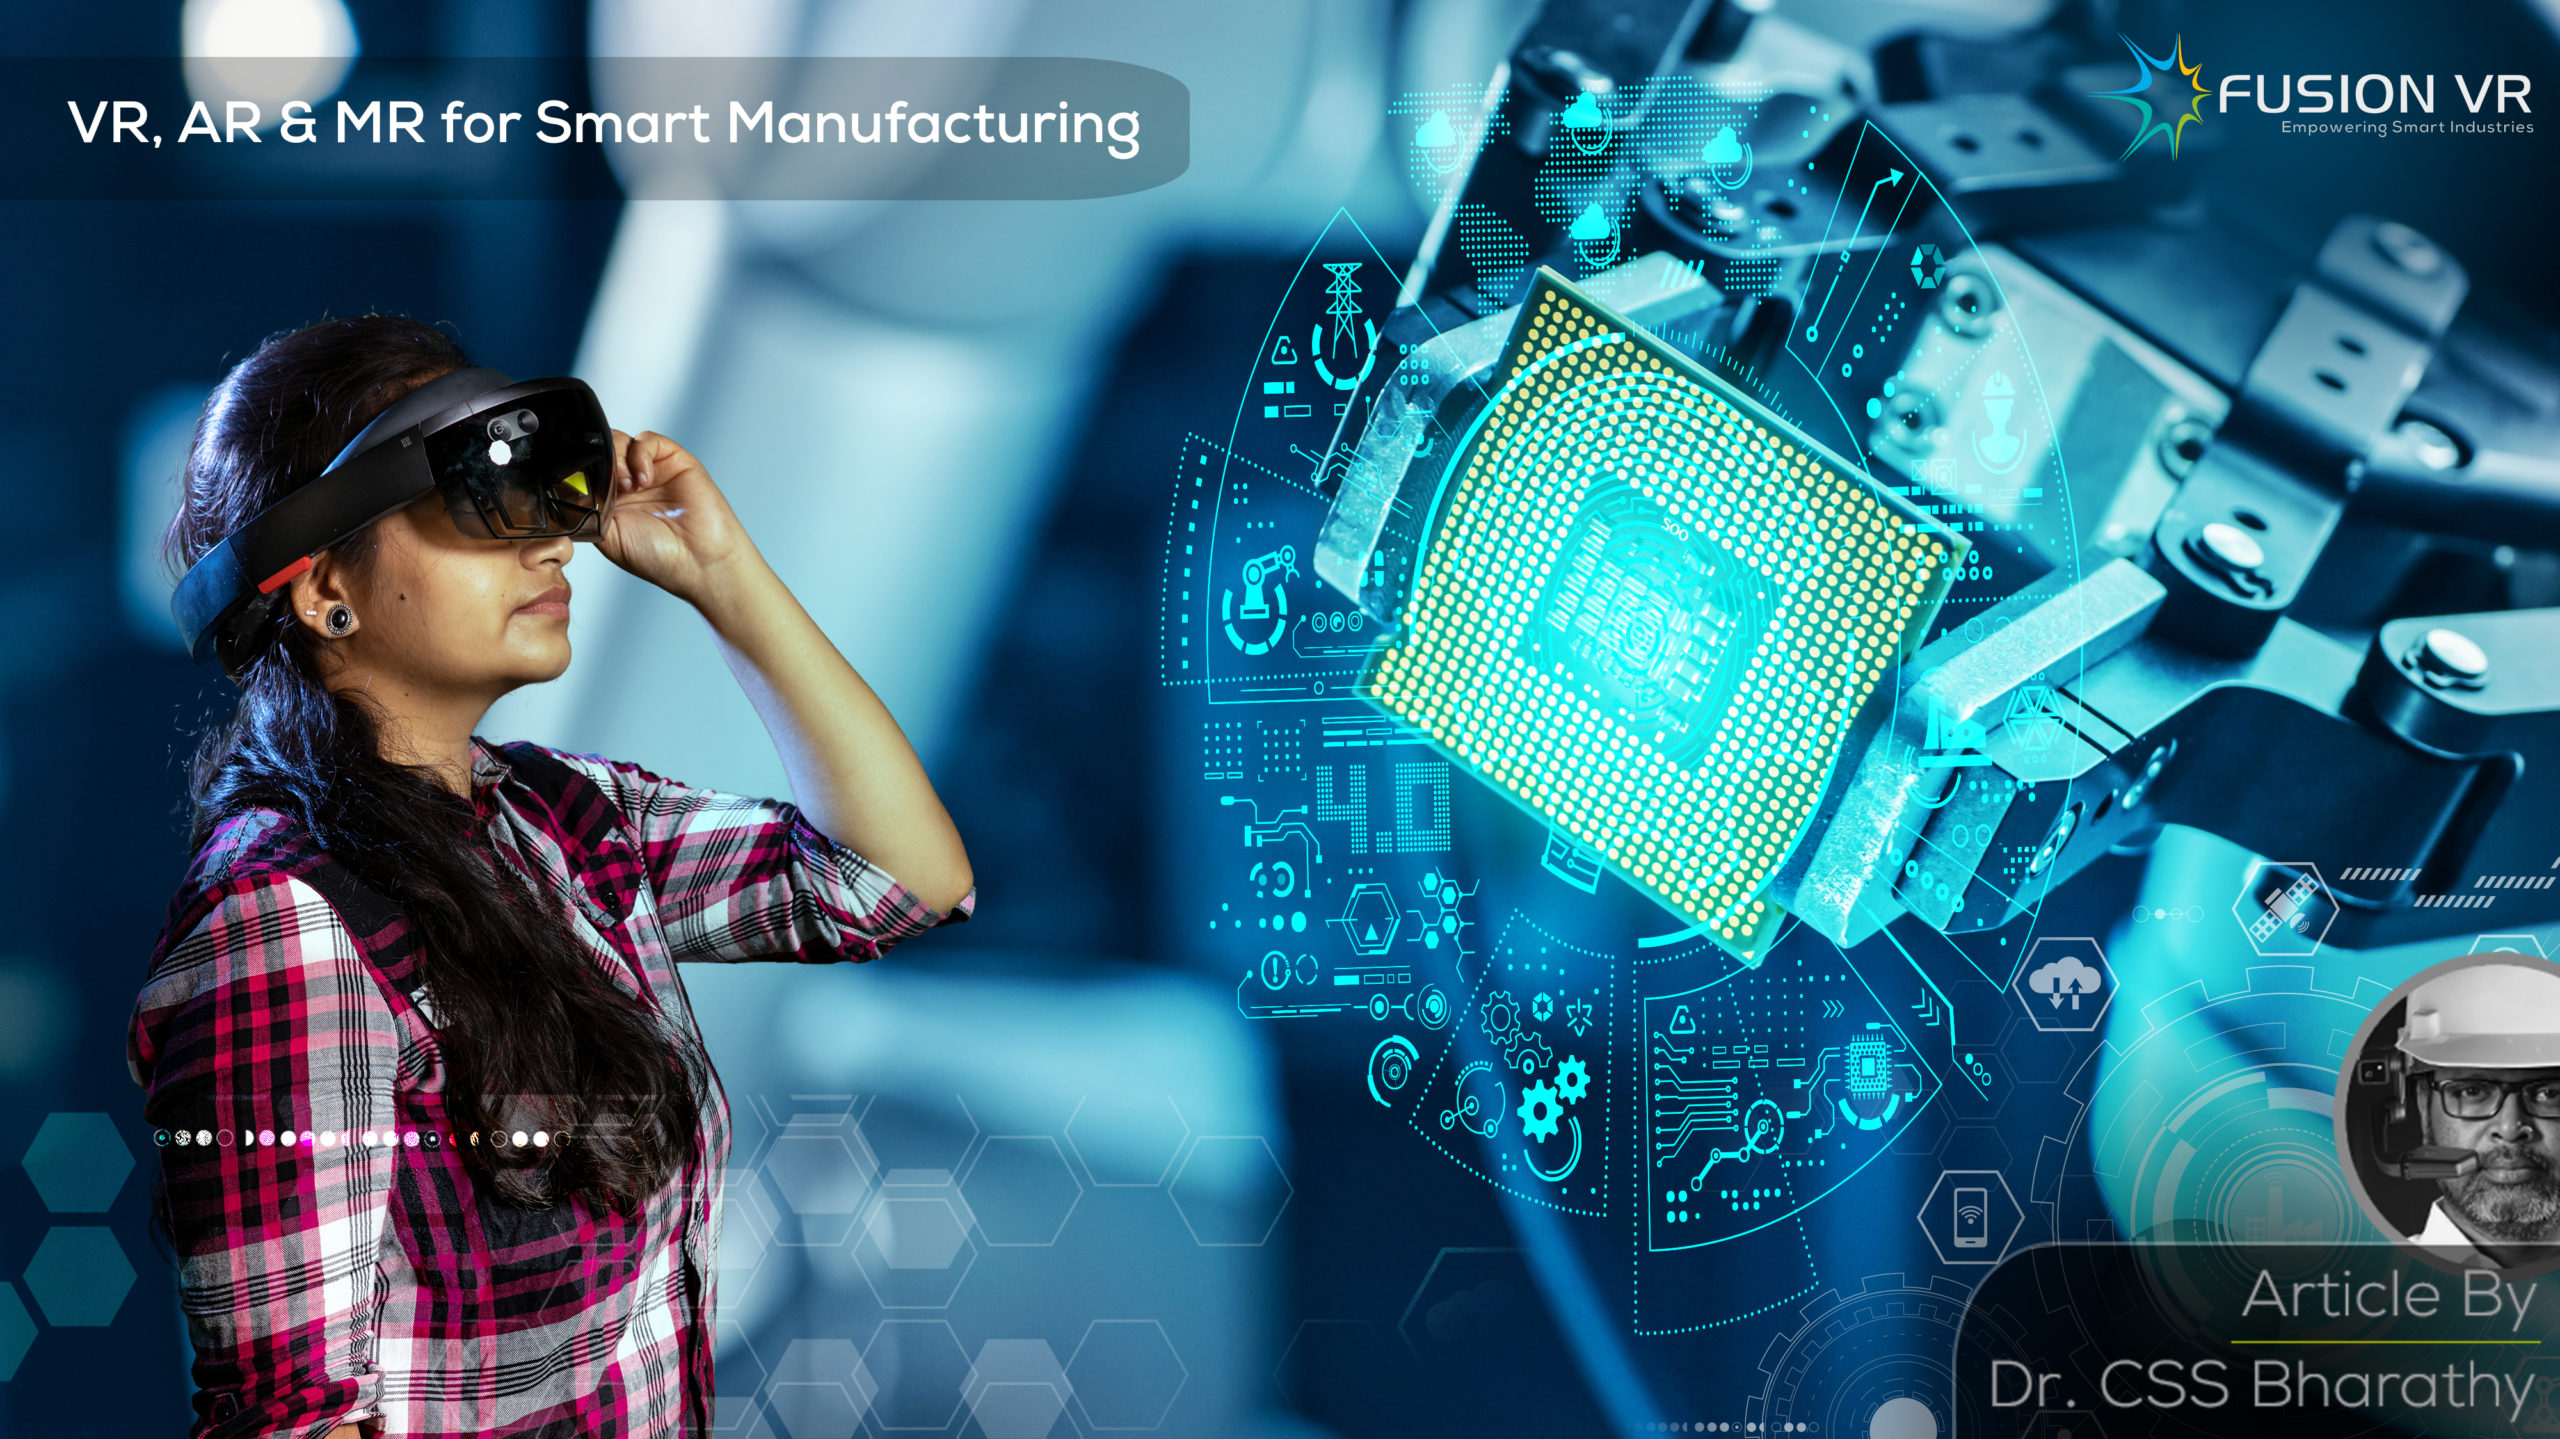 Why VR, AR & MR adoption is so crucial for smart manufacturing